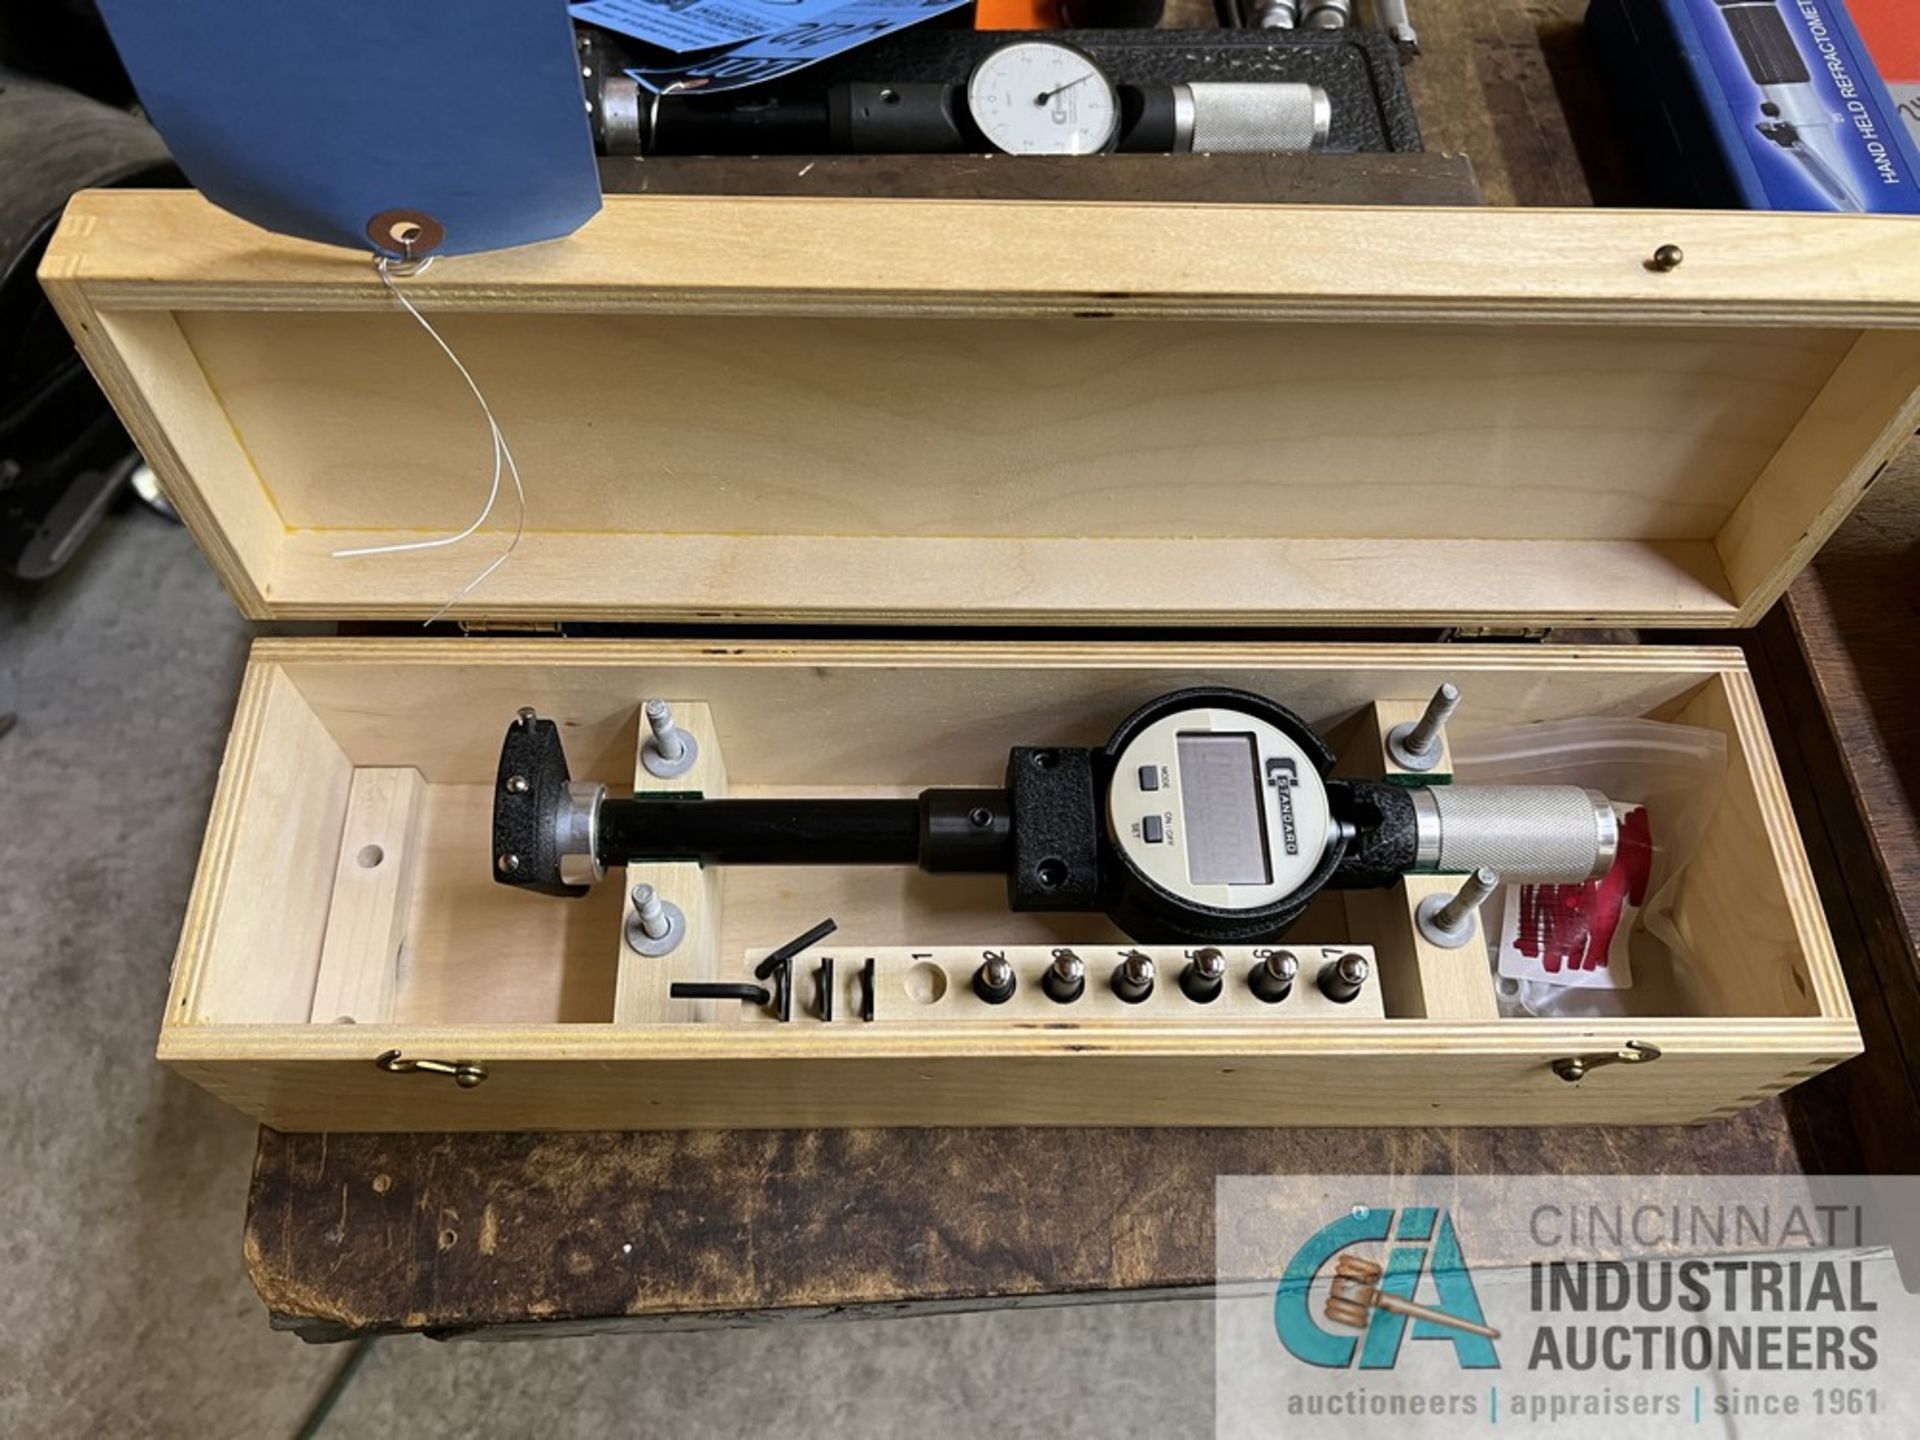 STANDARD GAGE NO. 5 DIGITAL BORE GAUGE **LOCATED AT 9150 PROSPECT STREET, INDIANAPOLIS, IN 46239 -